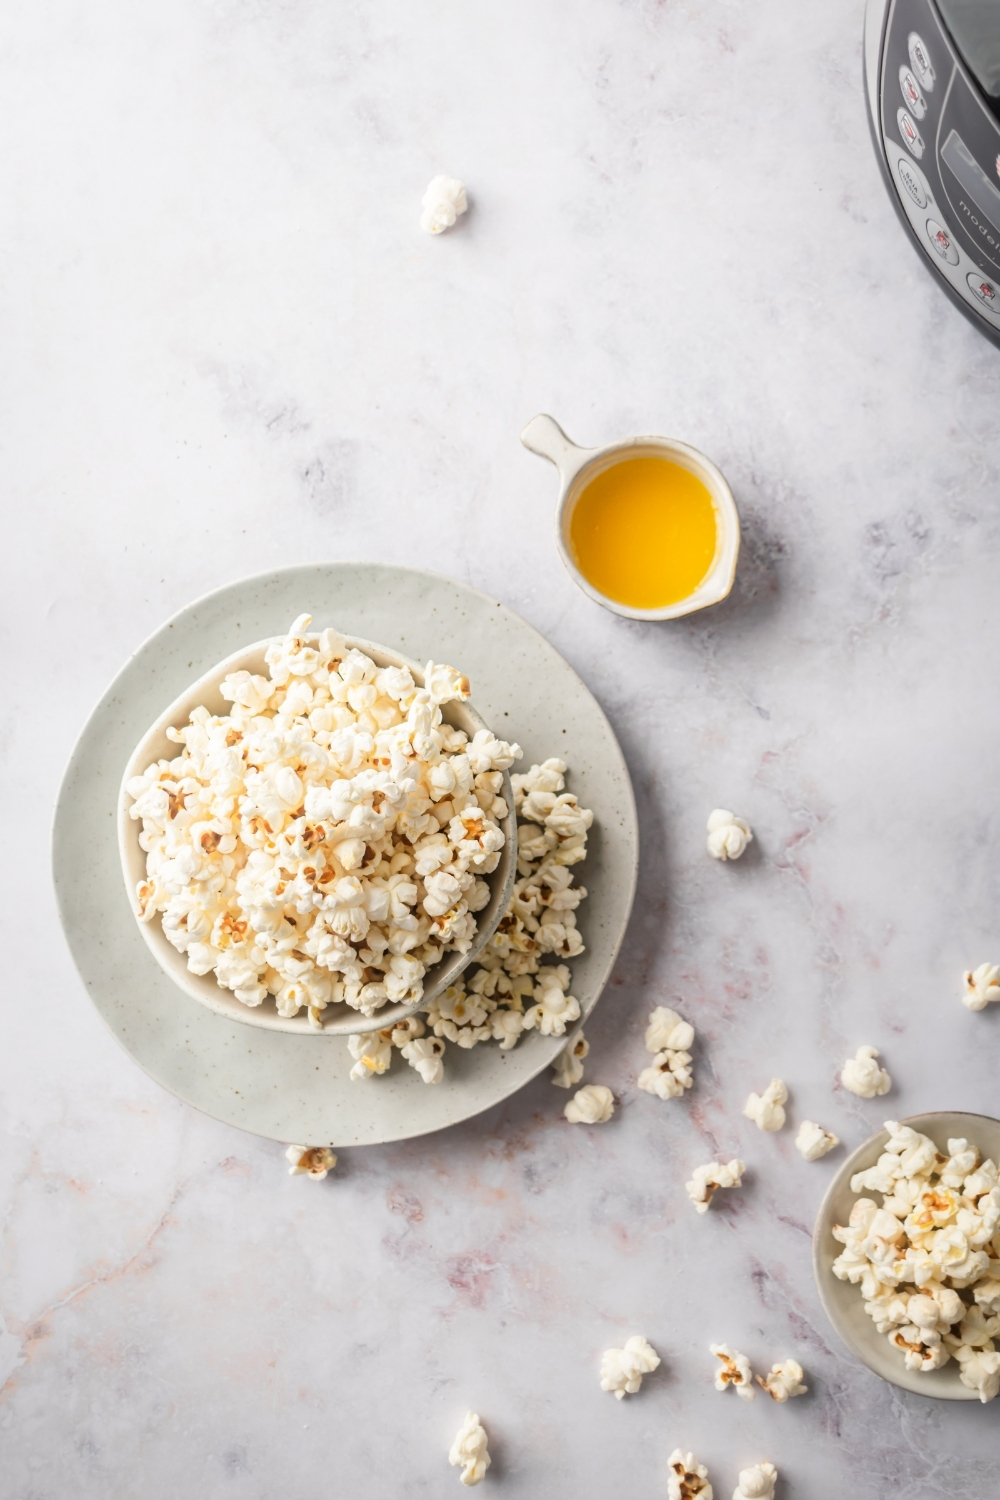 Popcorn in a white bowl on top of a dish and a white counter. Behind it is a small white cup of butter and in front of it are pieces of popcorn on the counter and another small bowl of popcorn.